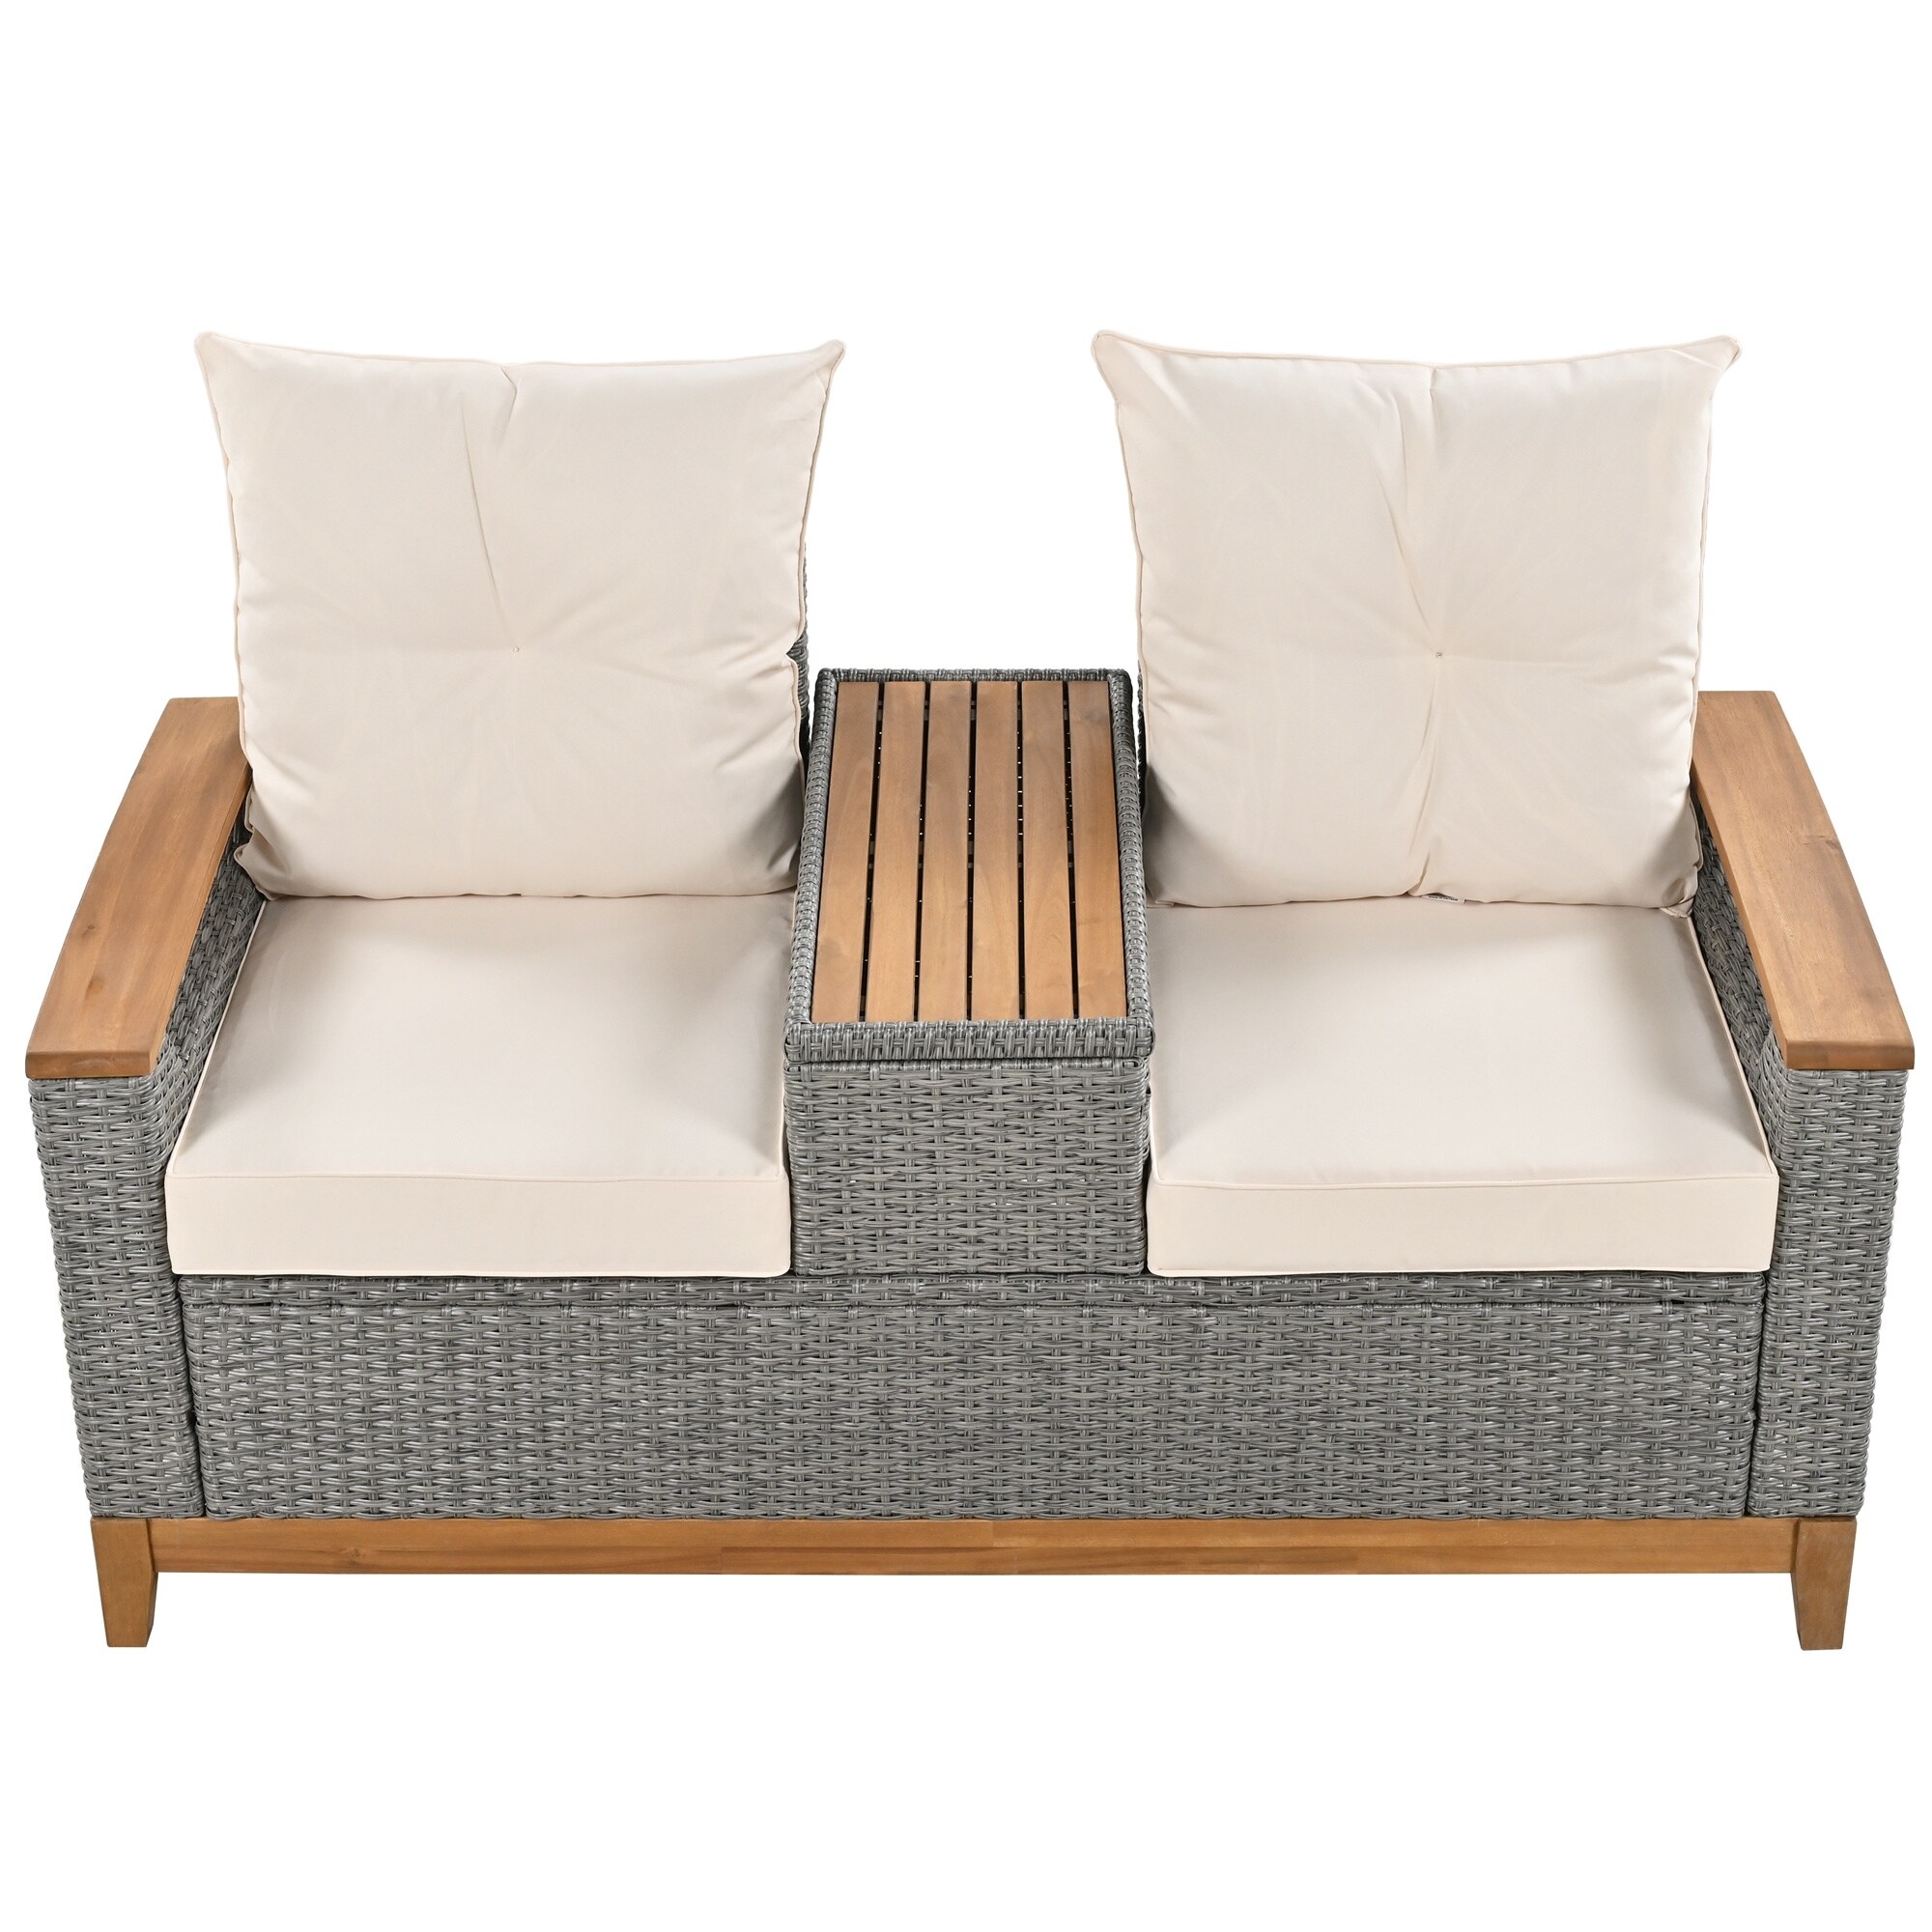 Outdoor Adjustable Loveseat With Storage Space